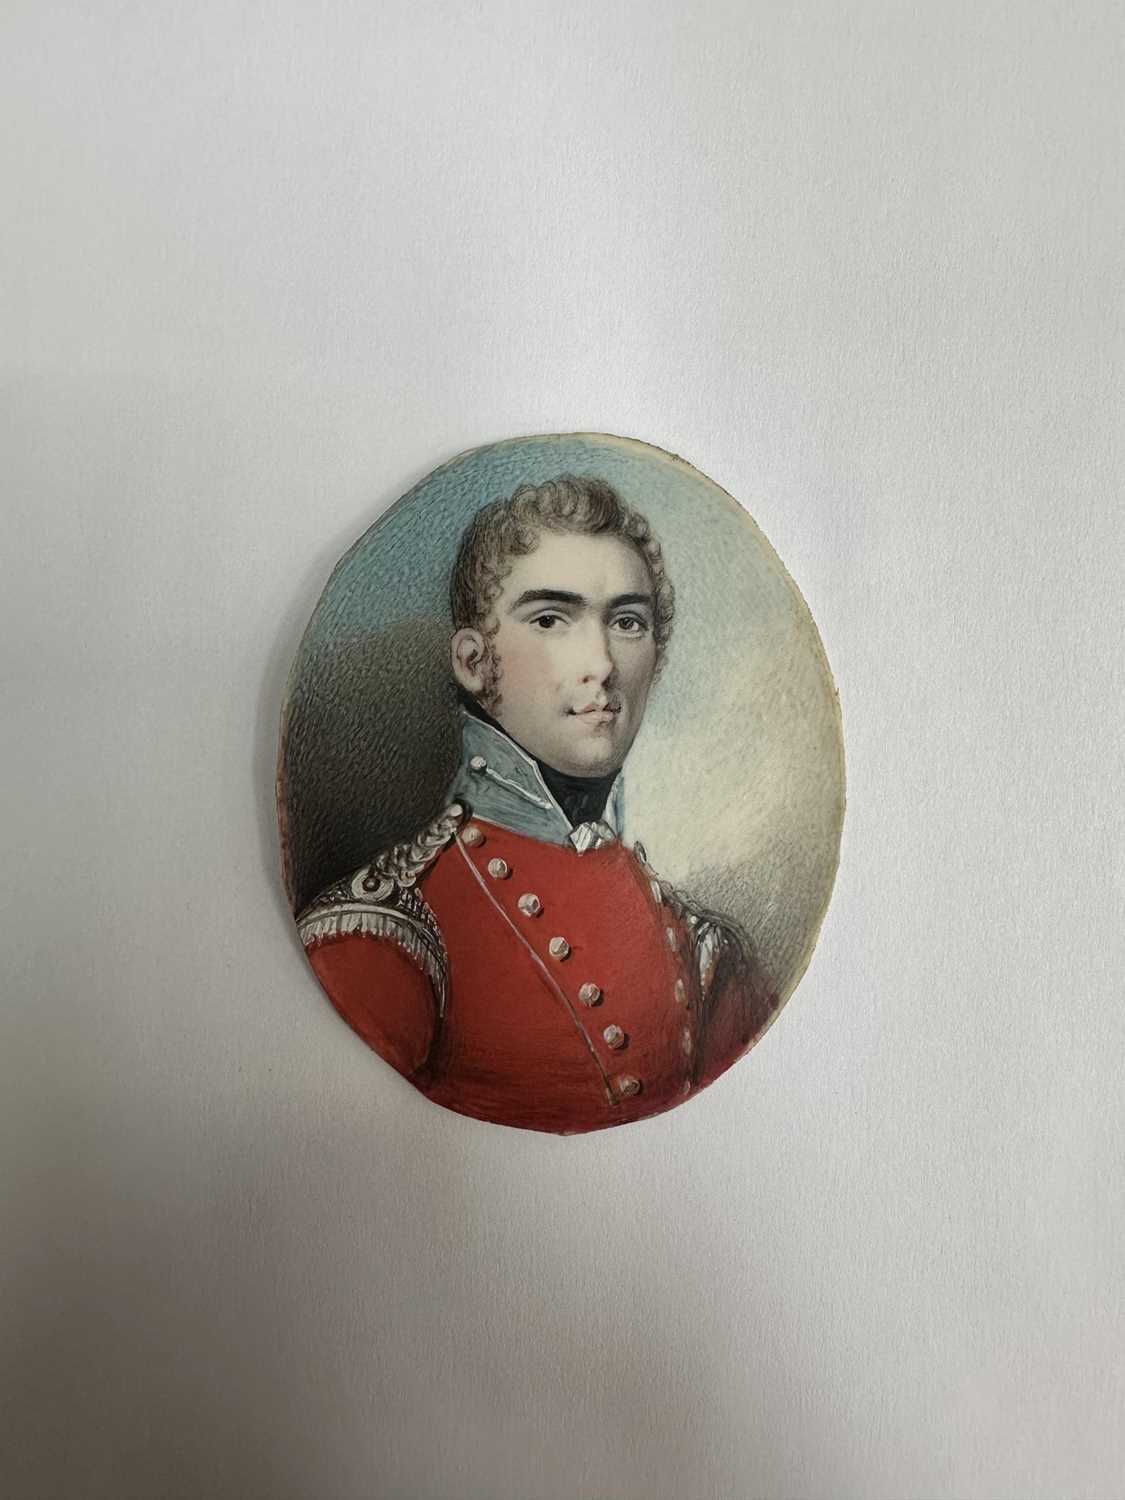 Nicholas Freese (active 1794-1814) portrait miniature on ivory - Portrait of an Office - Image 11 of 16